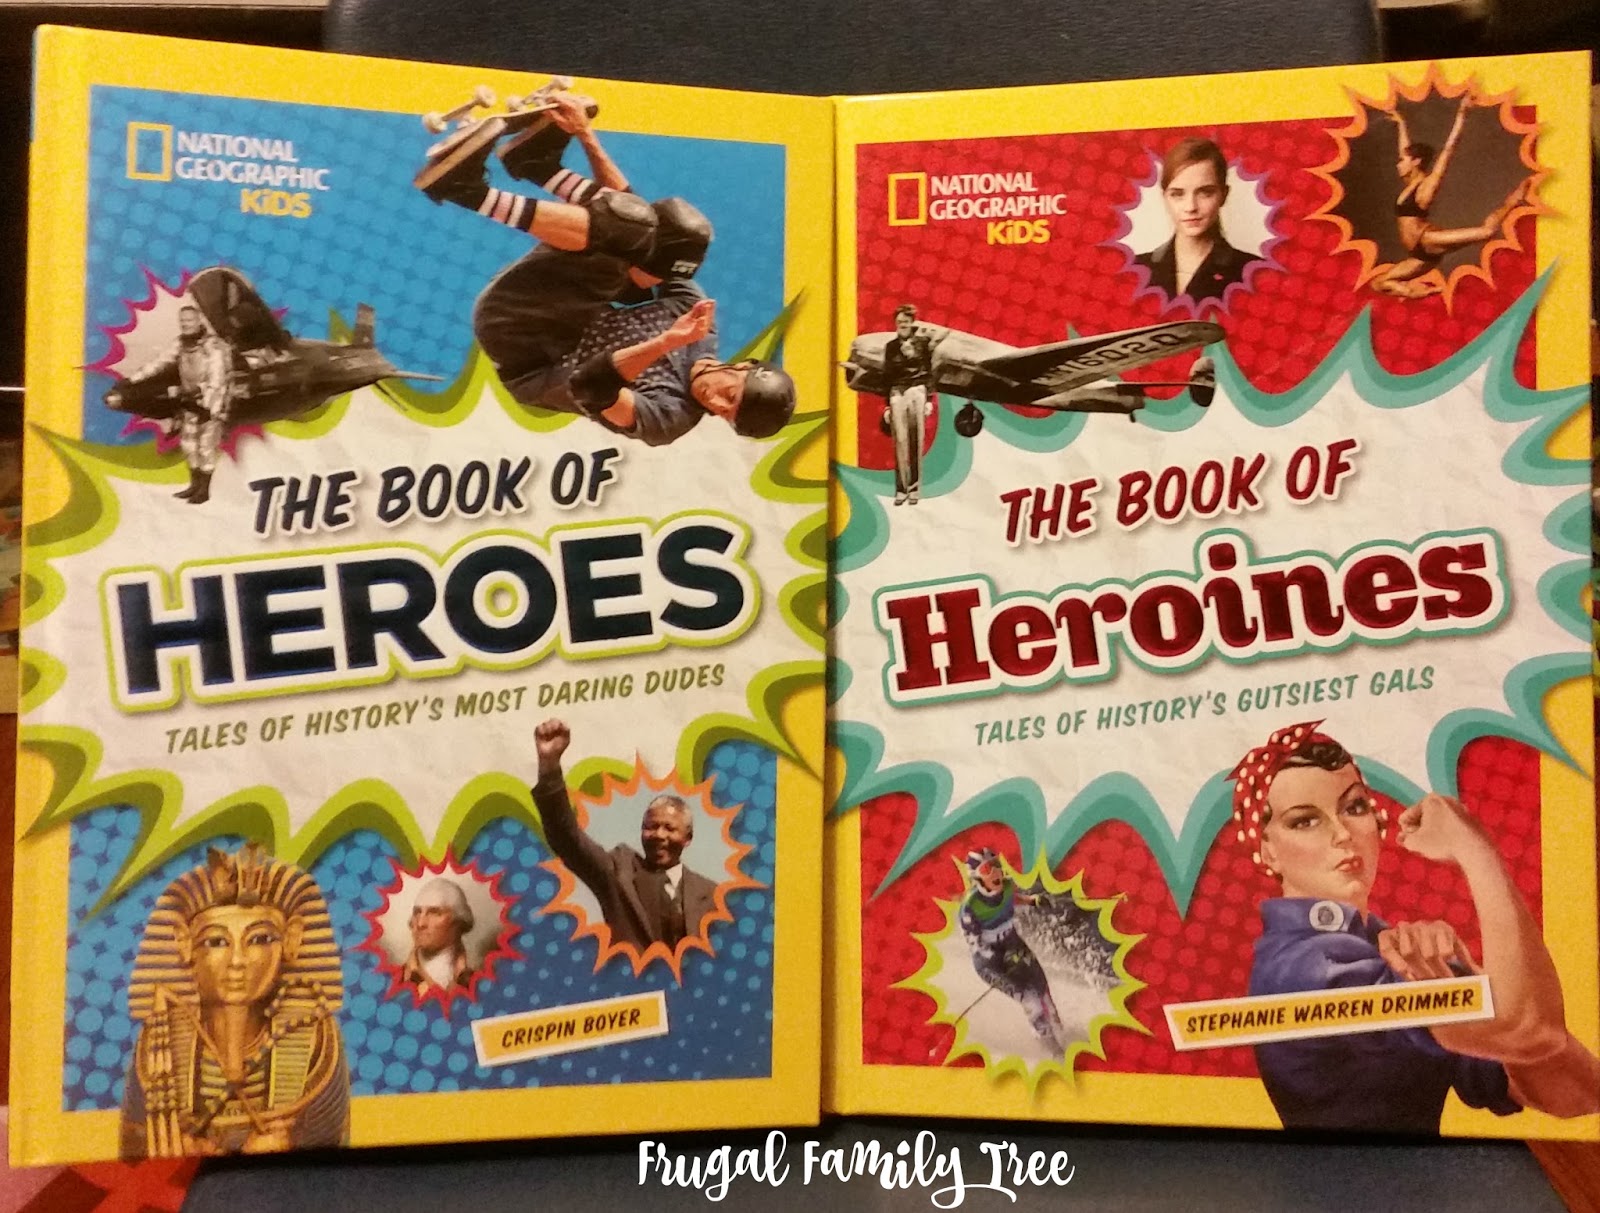 National Geographic Kids The Book of Heroes and The Book of